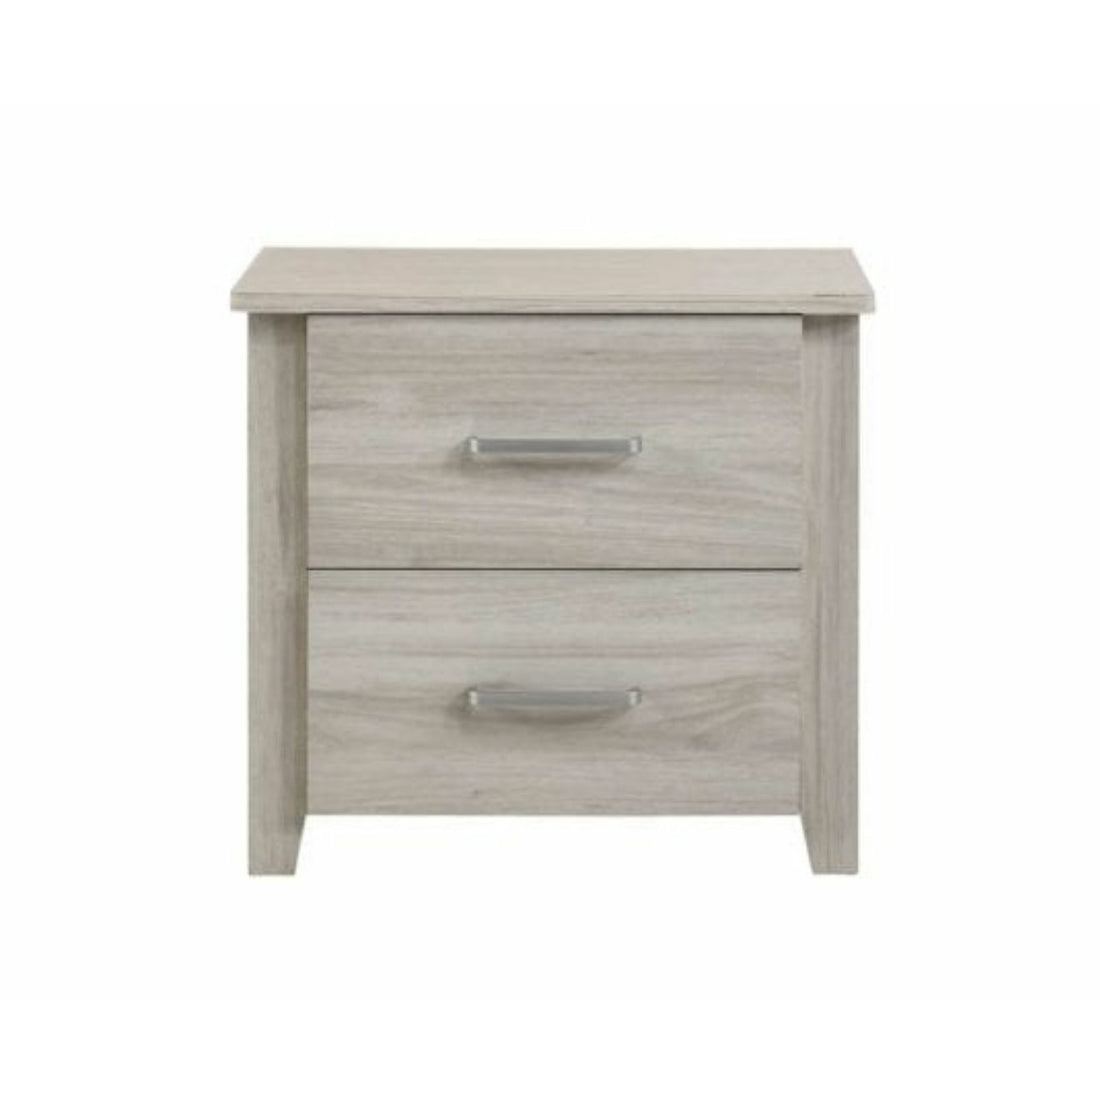 White Oak Bedside Table with 2 Drawers